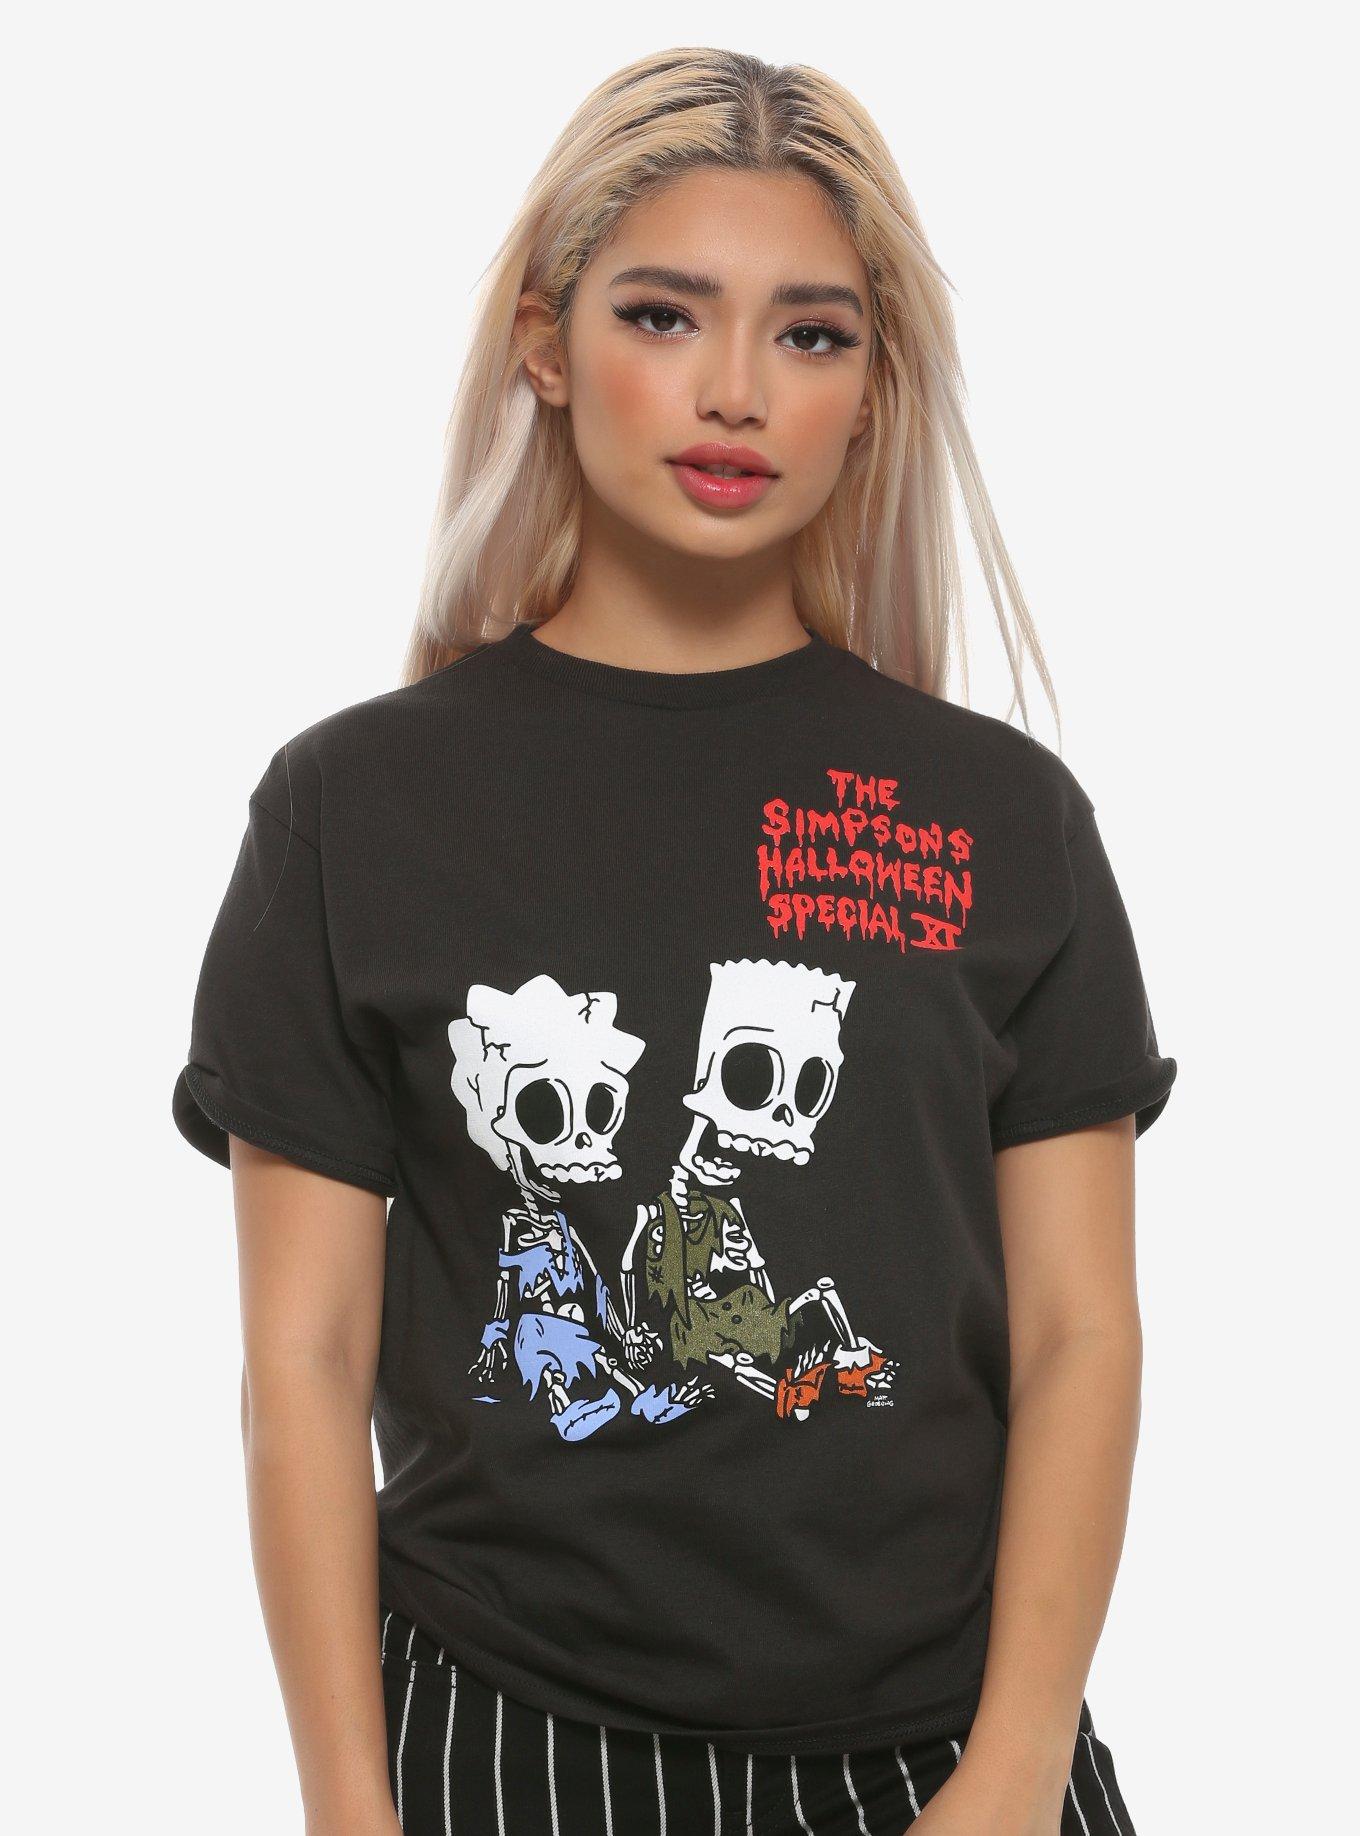 The Simpsons Halloween Special XI Girls T-Shirt, MULTI, hi-res